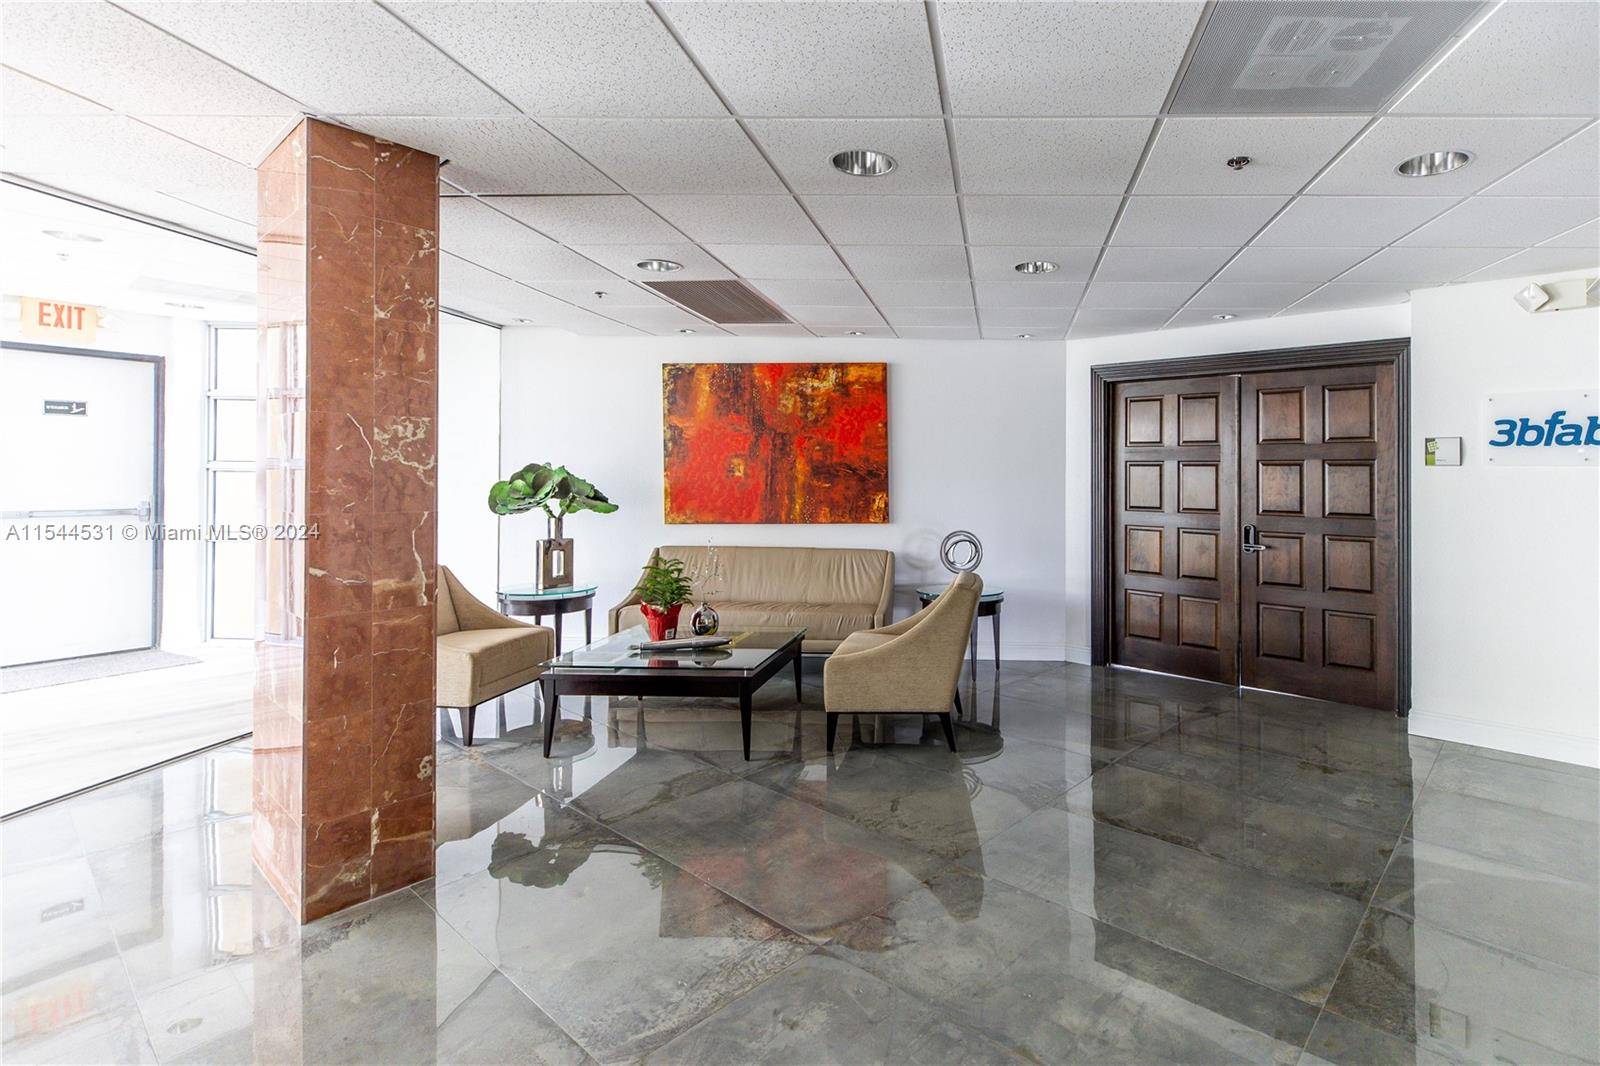 Discover premier A office space, a turnkey suite offering a private reception, elegant lobby, and fully furnished interiors, including 10 offices, a file room, storage space, 2 standard plus one ...